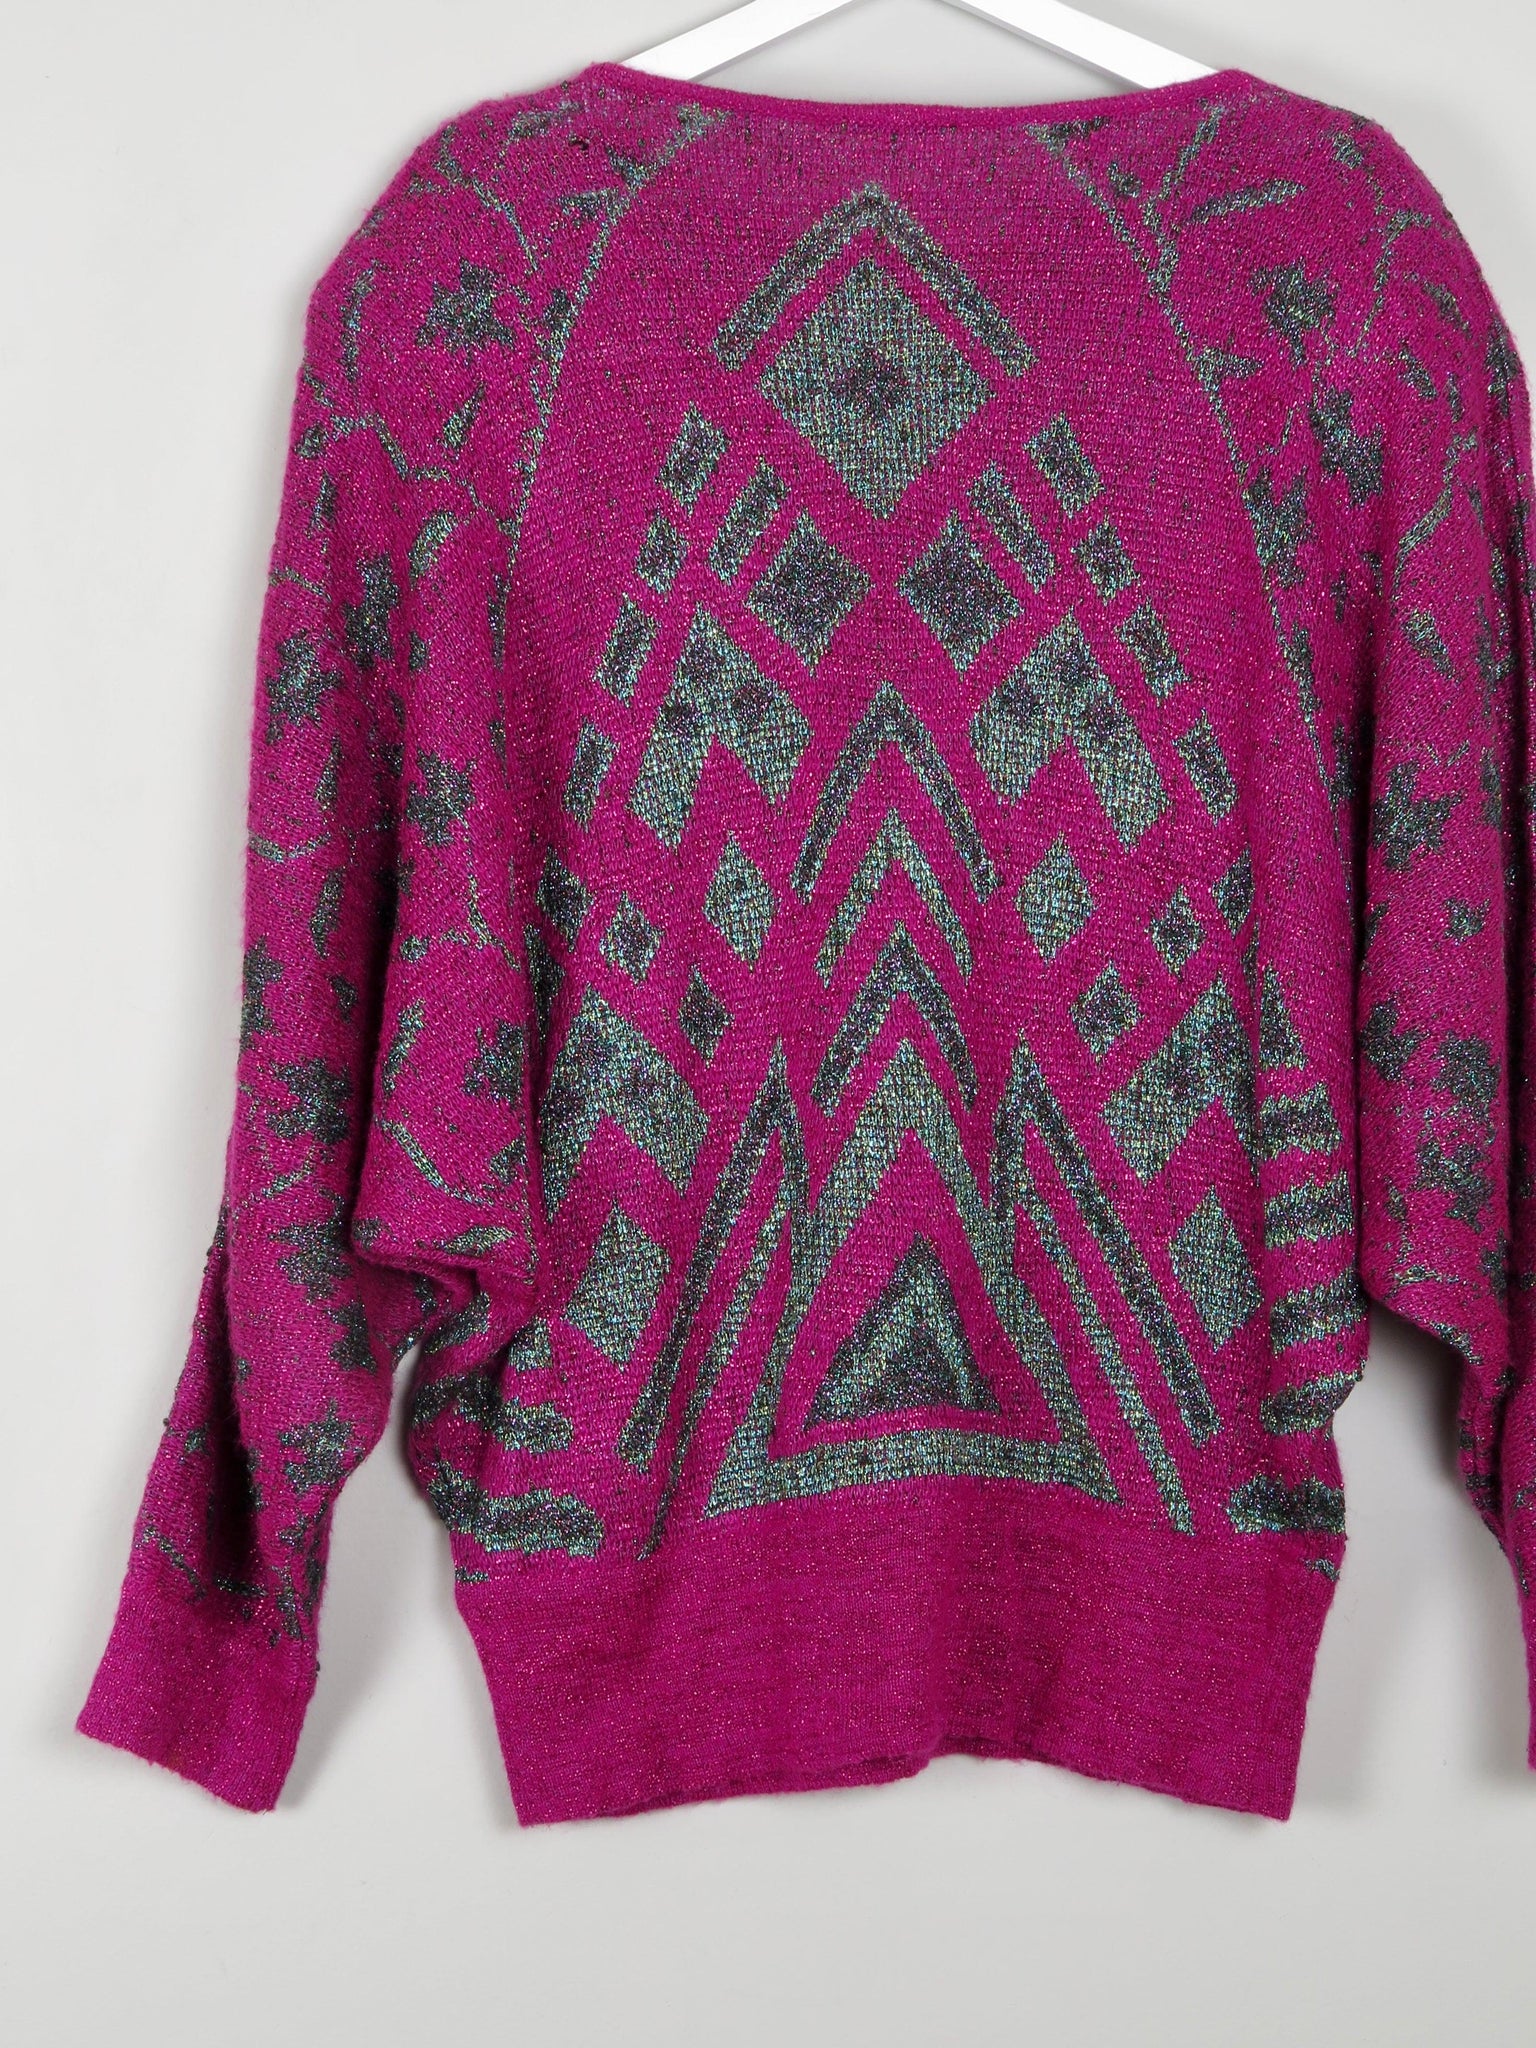 Women's Pink Lurex Jumper With Beads M/L - The Harlequin